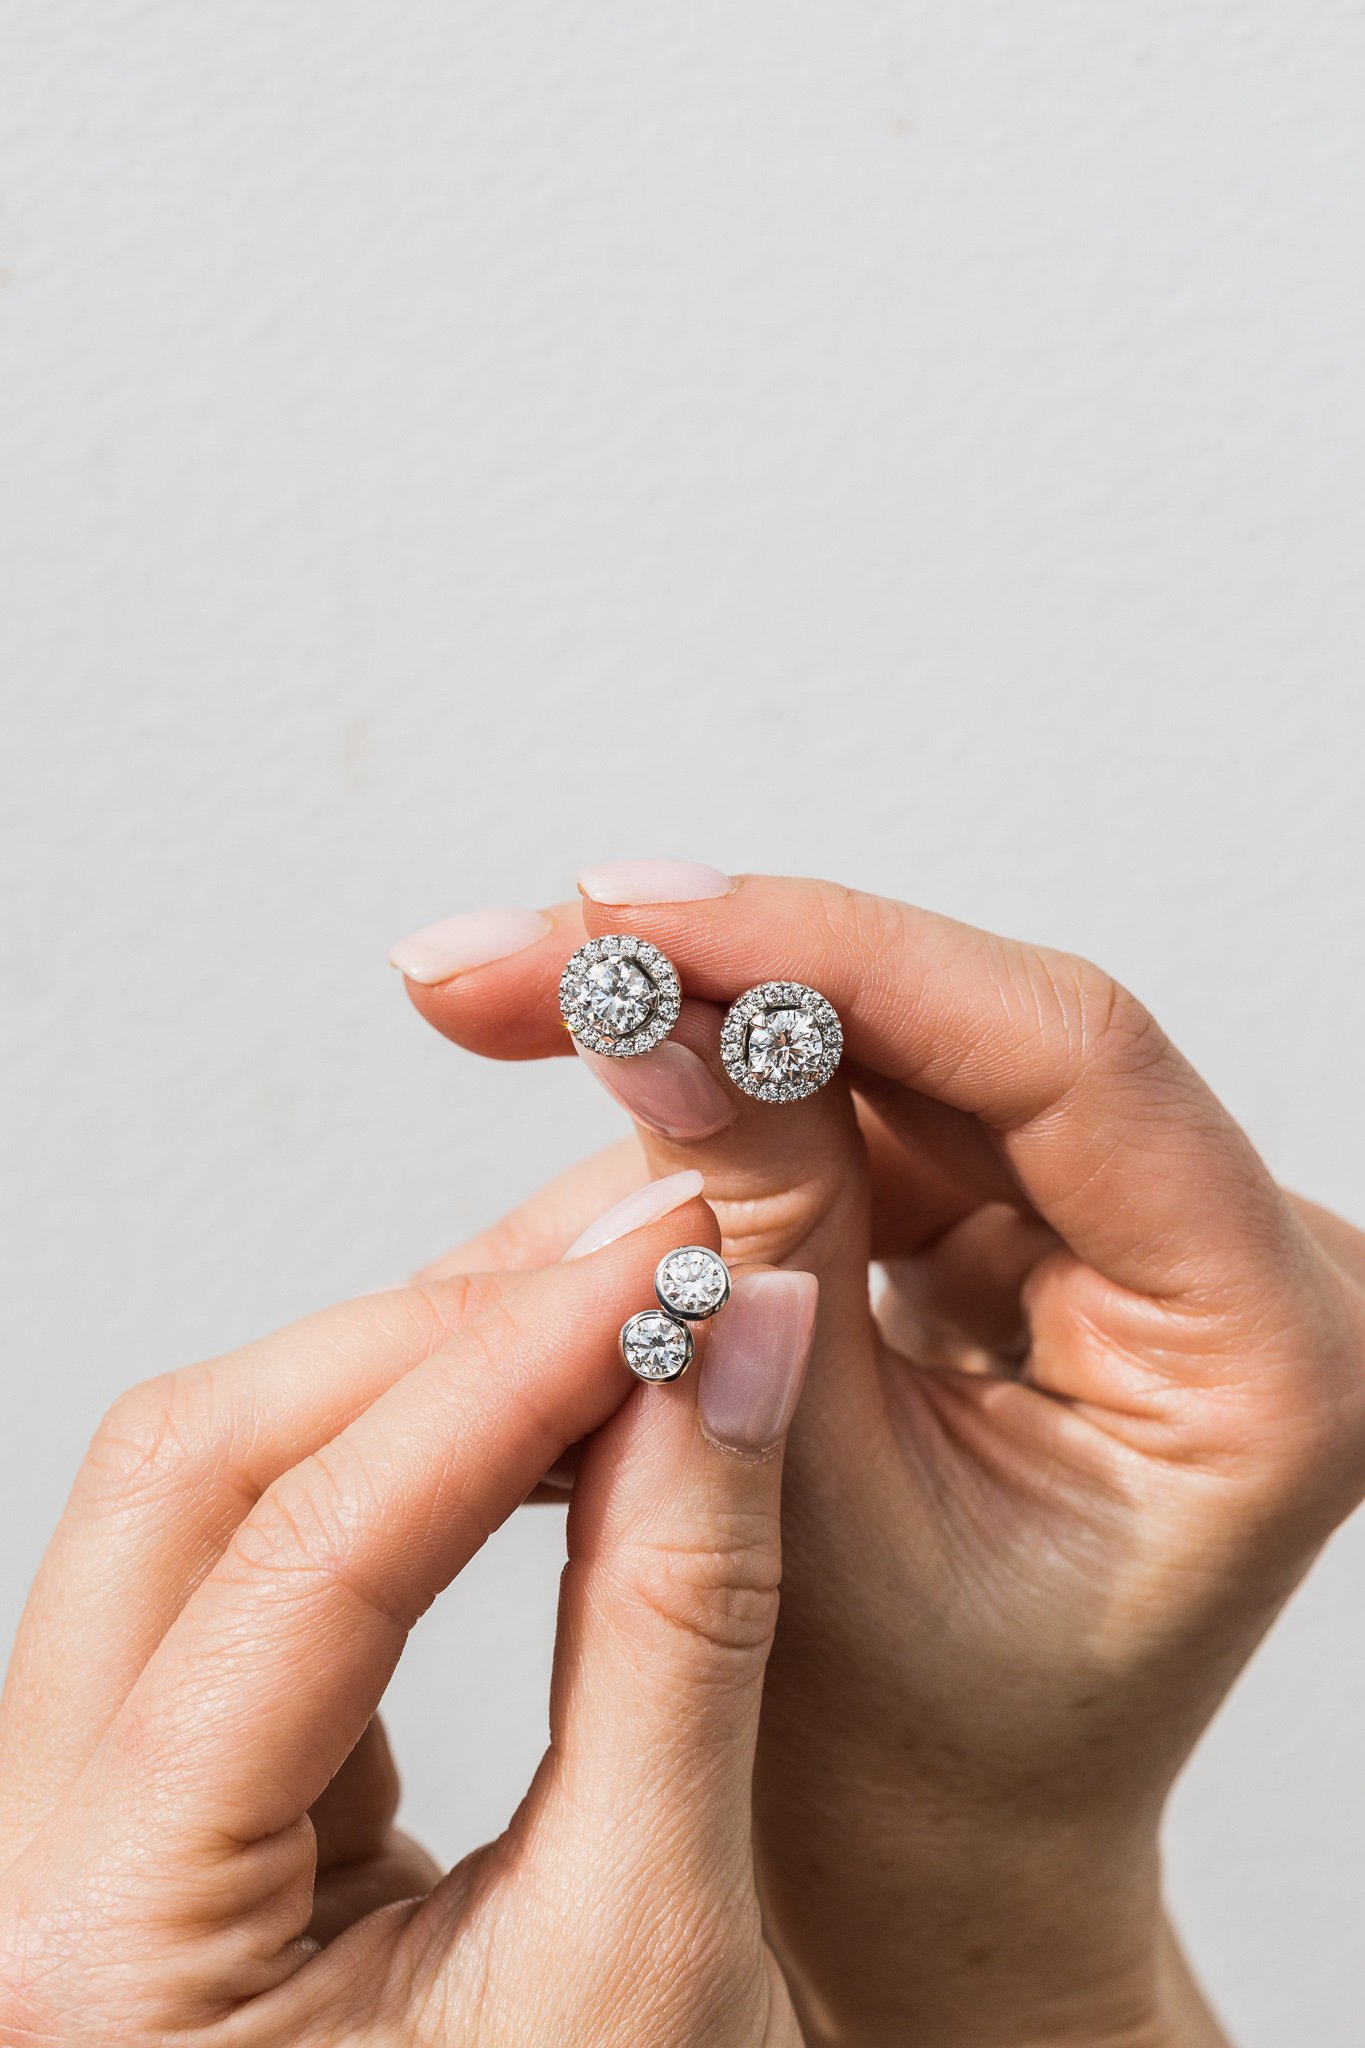 Canberra product photography - hands hold diamond earrings